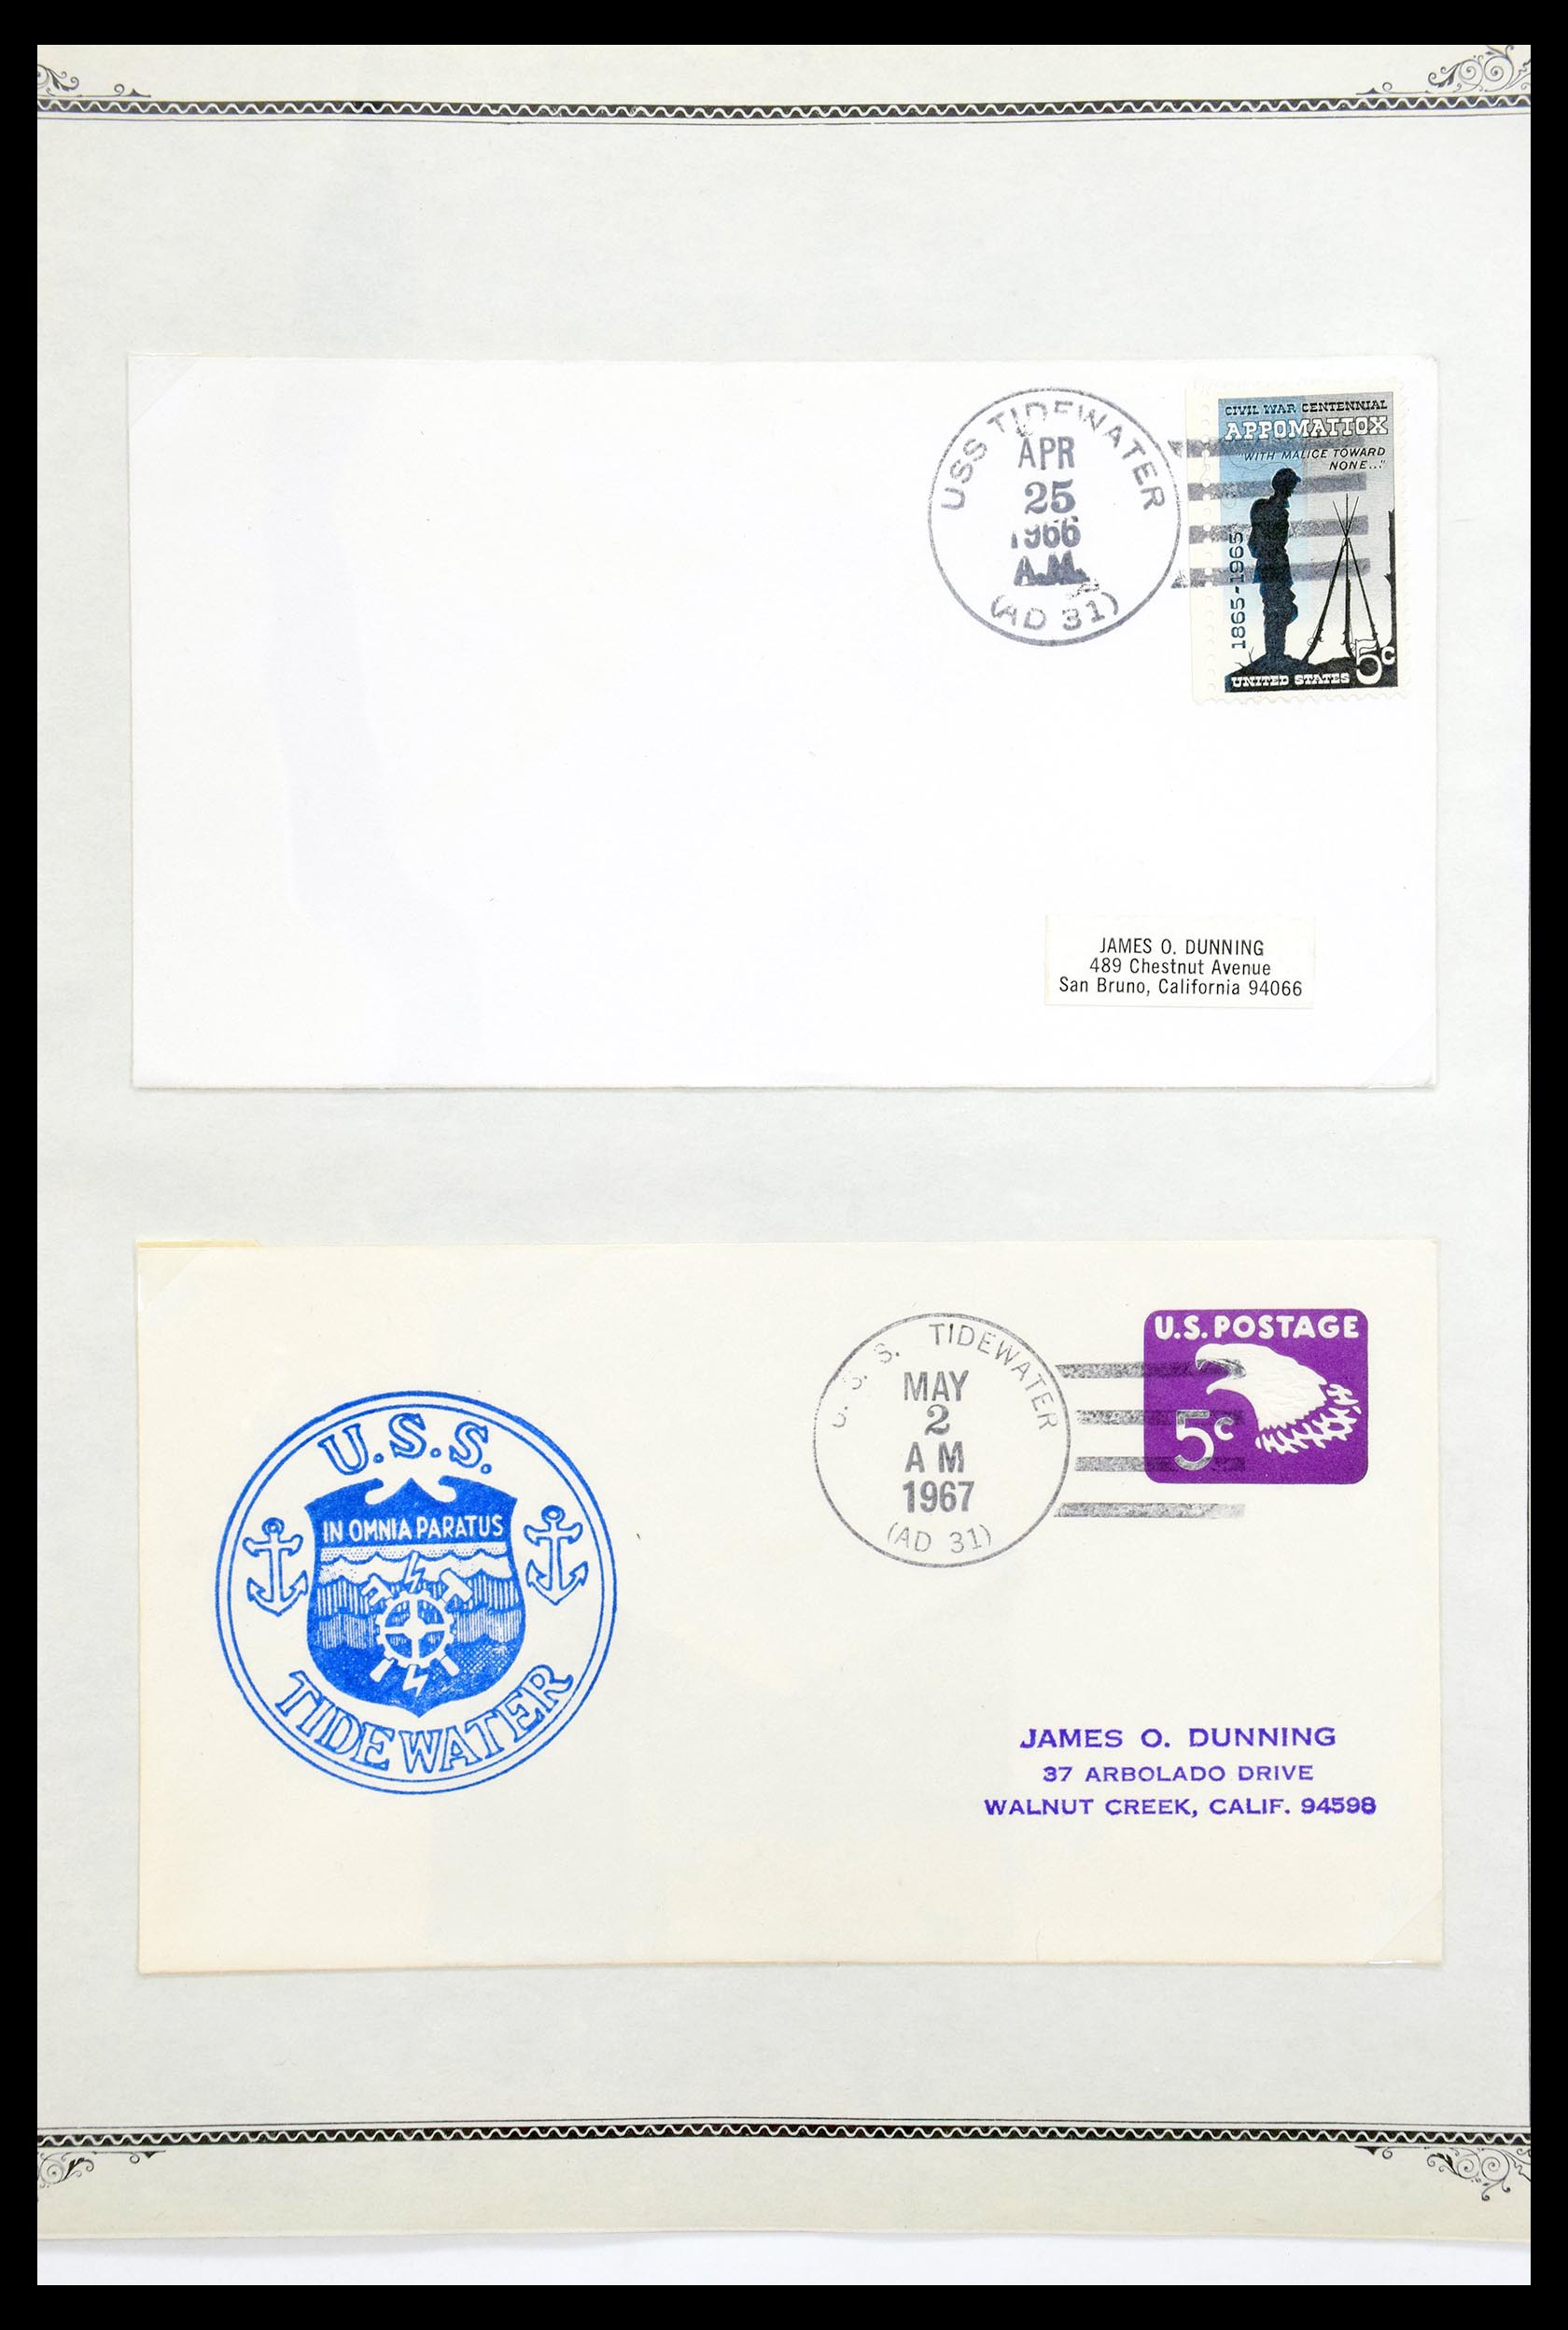 30341 011 - 30341 USA naval cover collection 1930-1970.